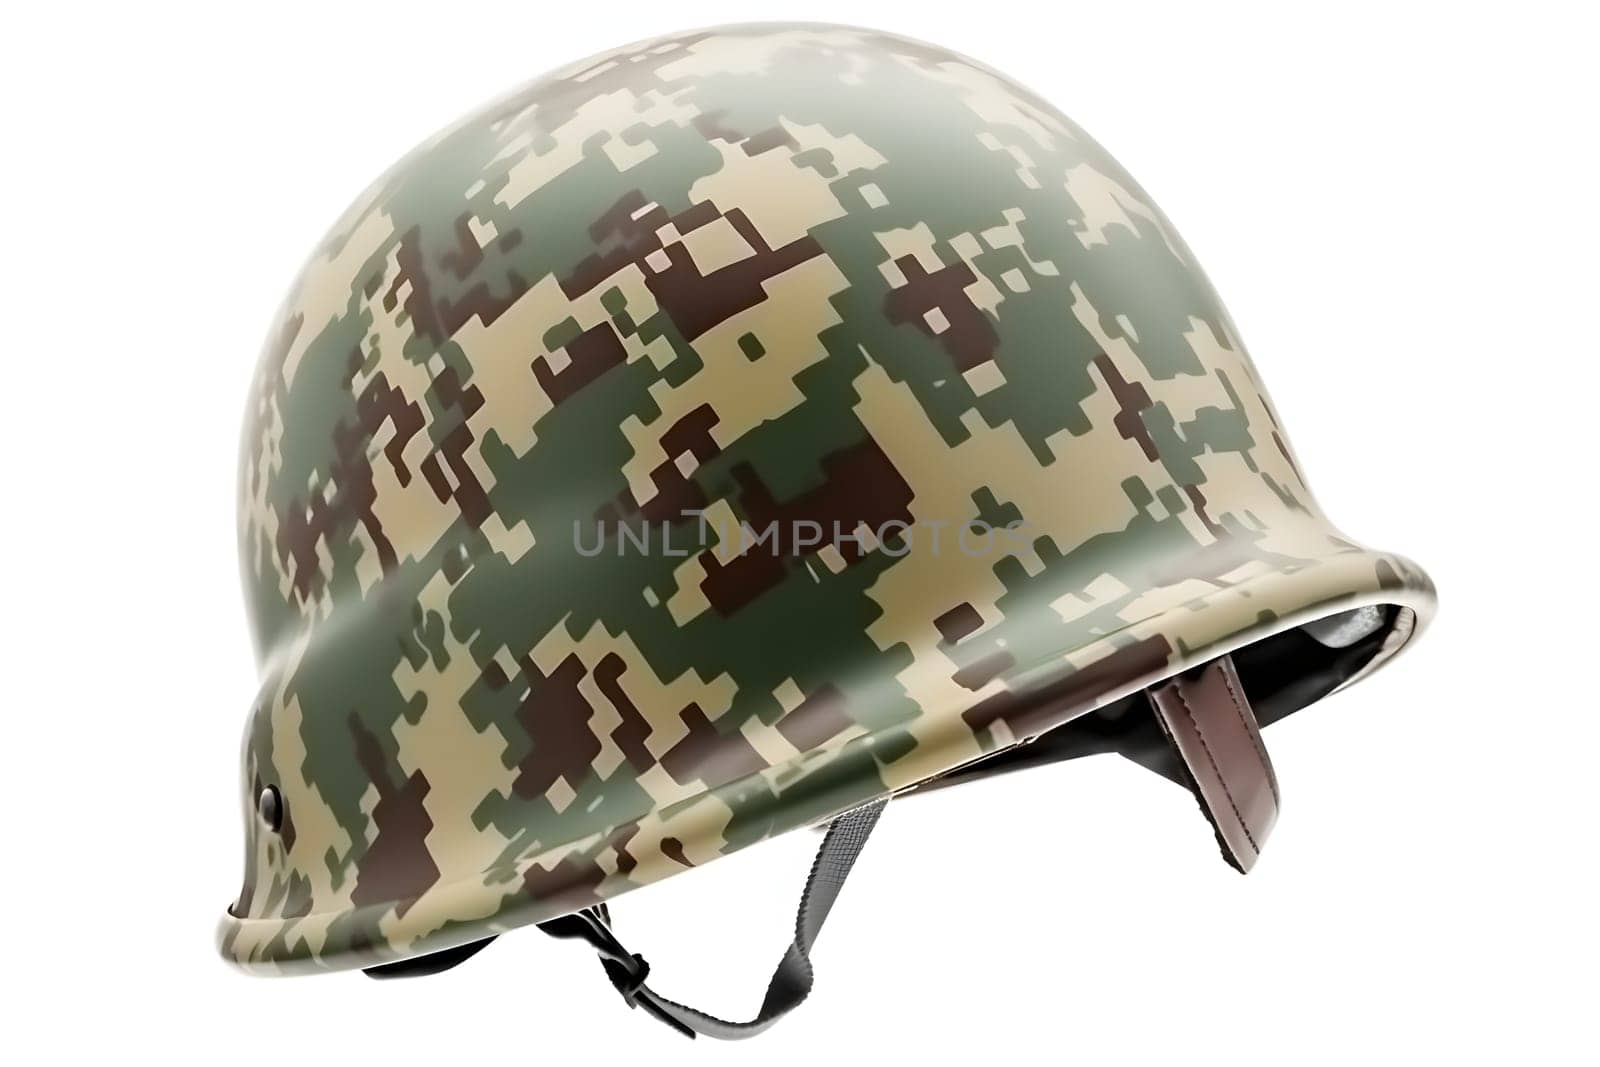 20-th century combat infantry helmet on white background. Neural network generated in May 2023. Not based on any actual person, scene or pattern.